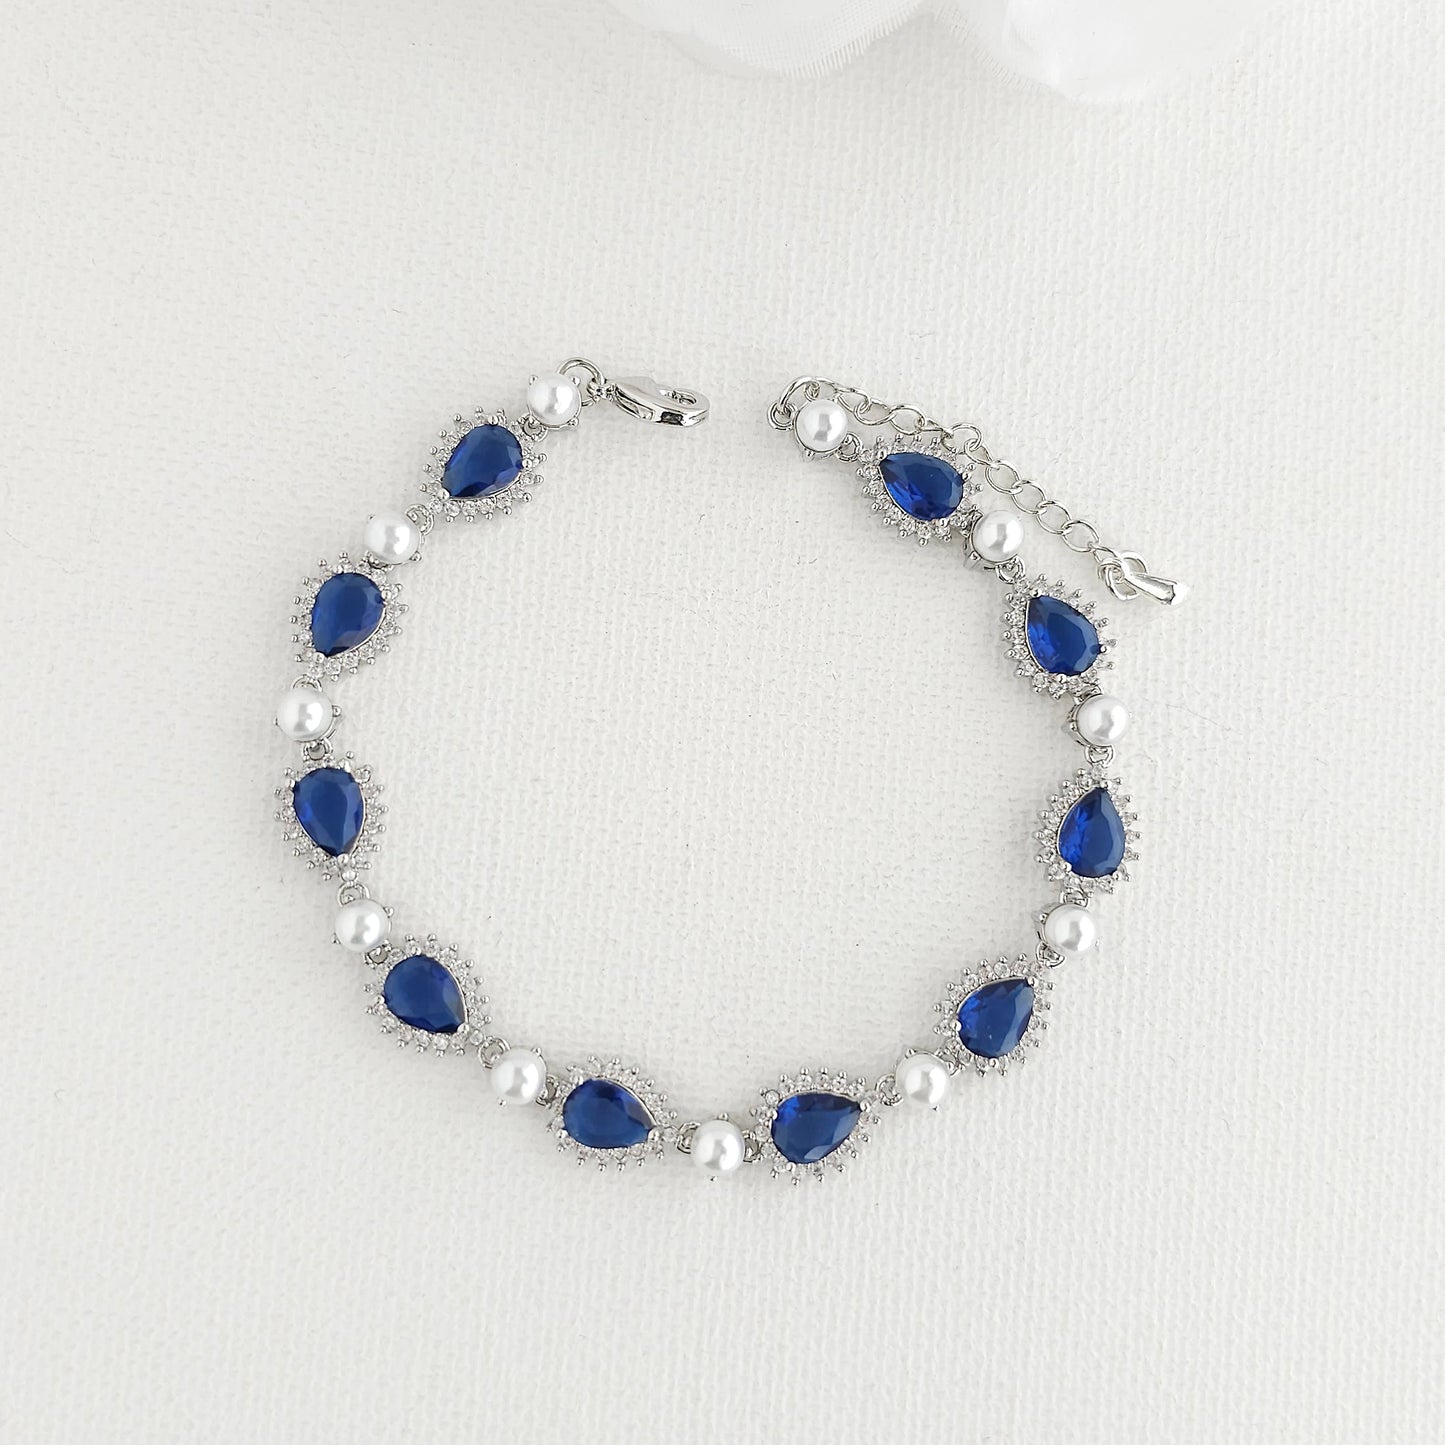 Something Blue Wedding Bracelet with Pearls and Gold-Aoi